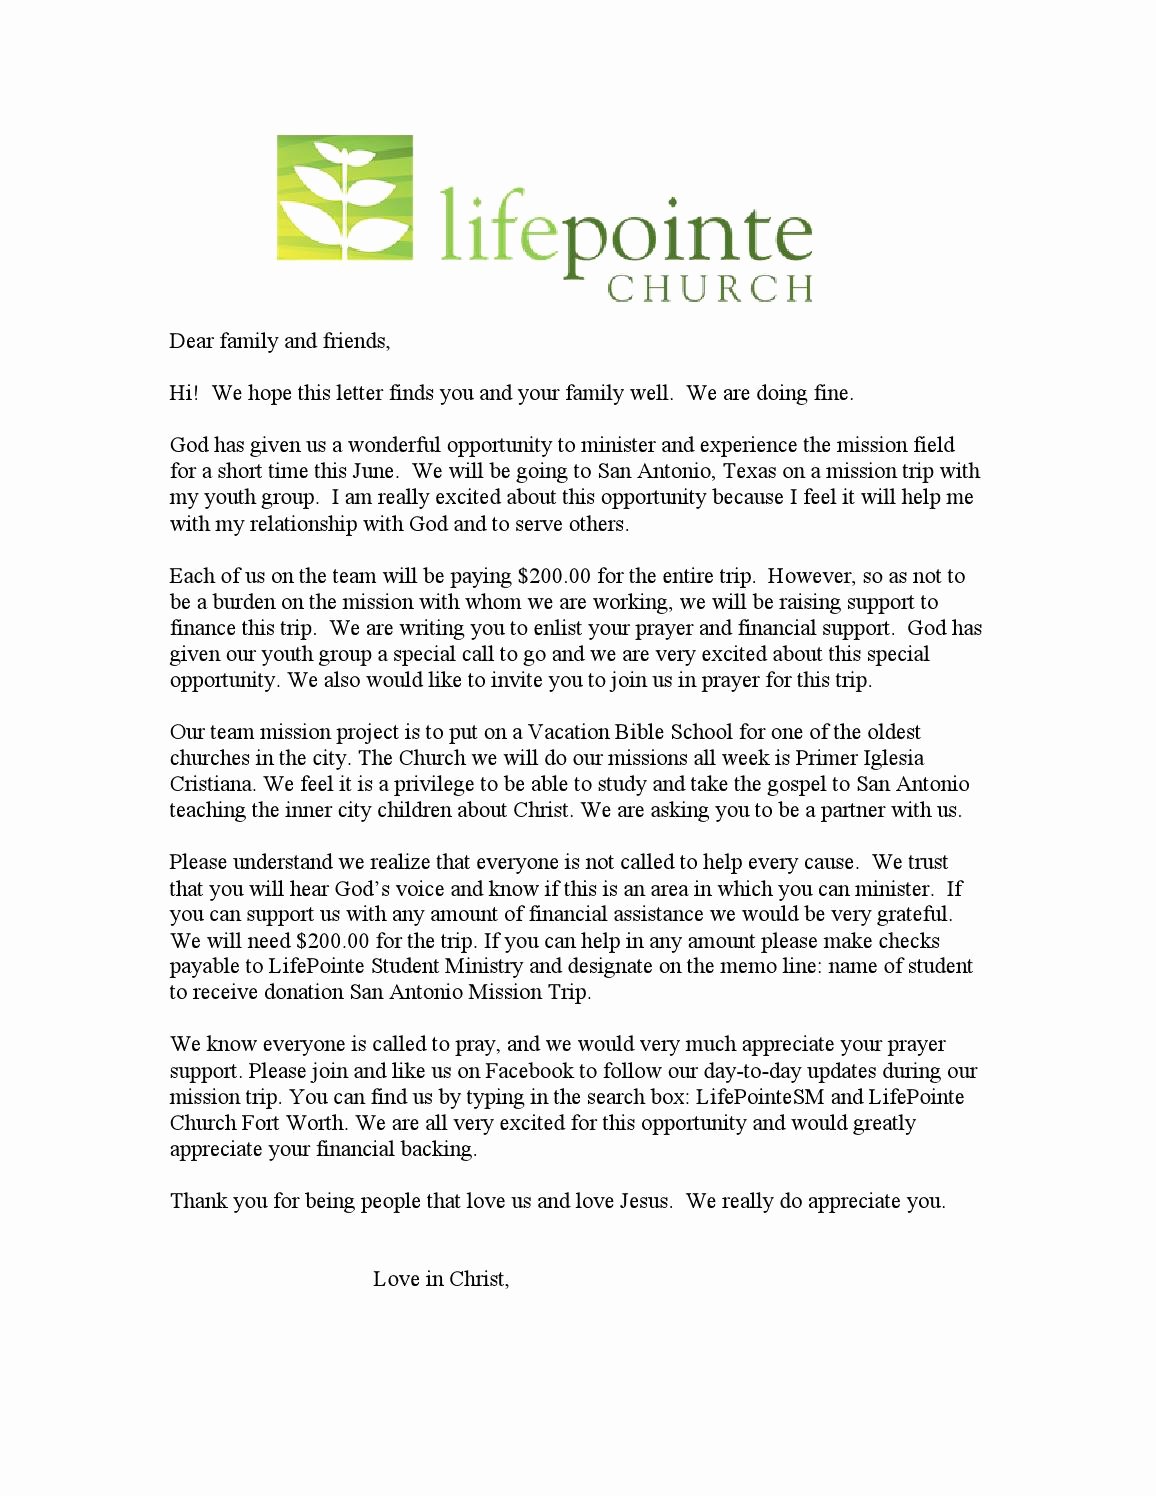 Missions Support Letter Inspirational Sa Mission Trip 2015 Donation Letter by Charles Bernal issuu